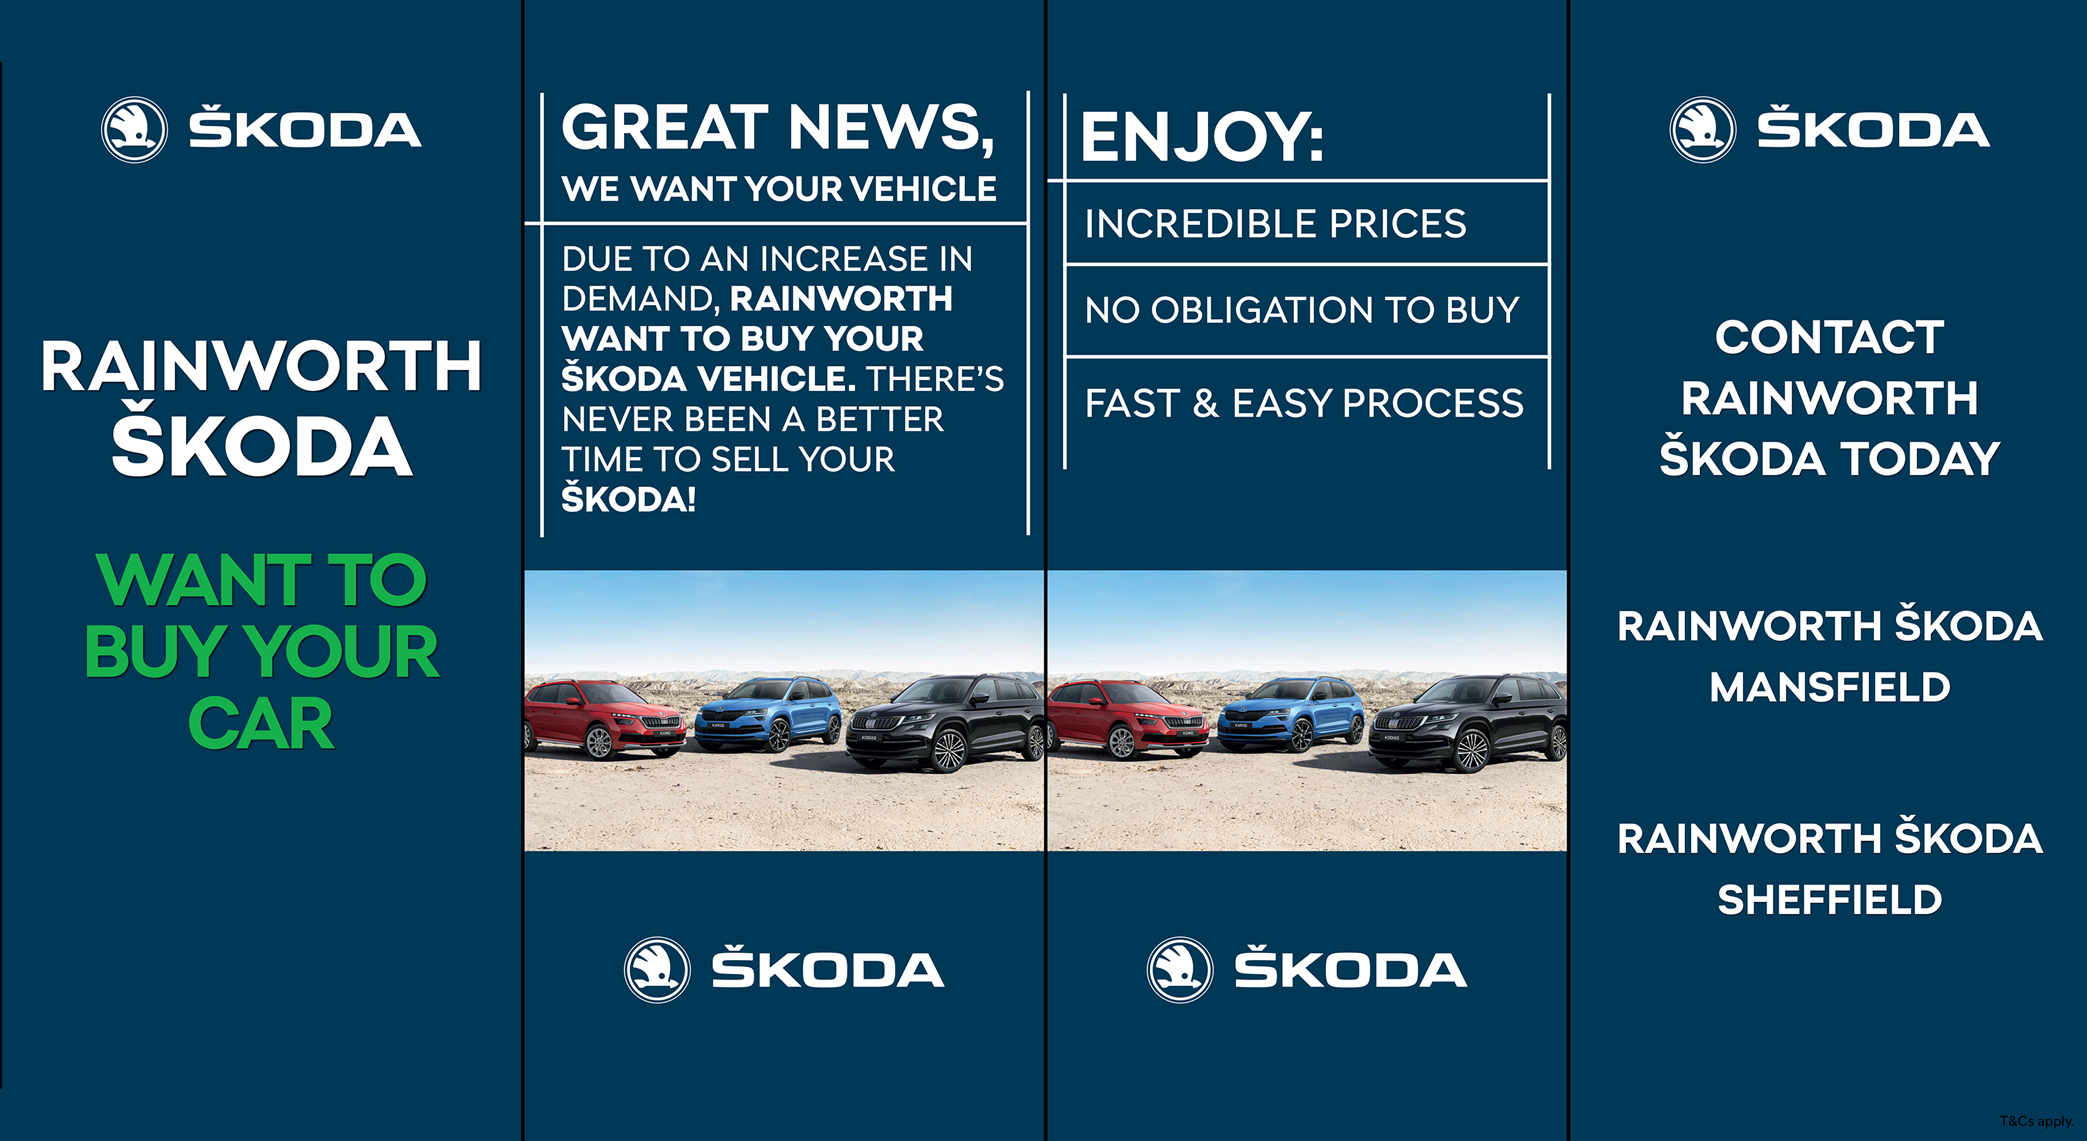 6989_RAINWORTH-SKODA_We-Want-Your-Used-Car-Campaign-Web-Offer-Page